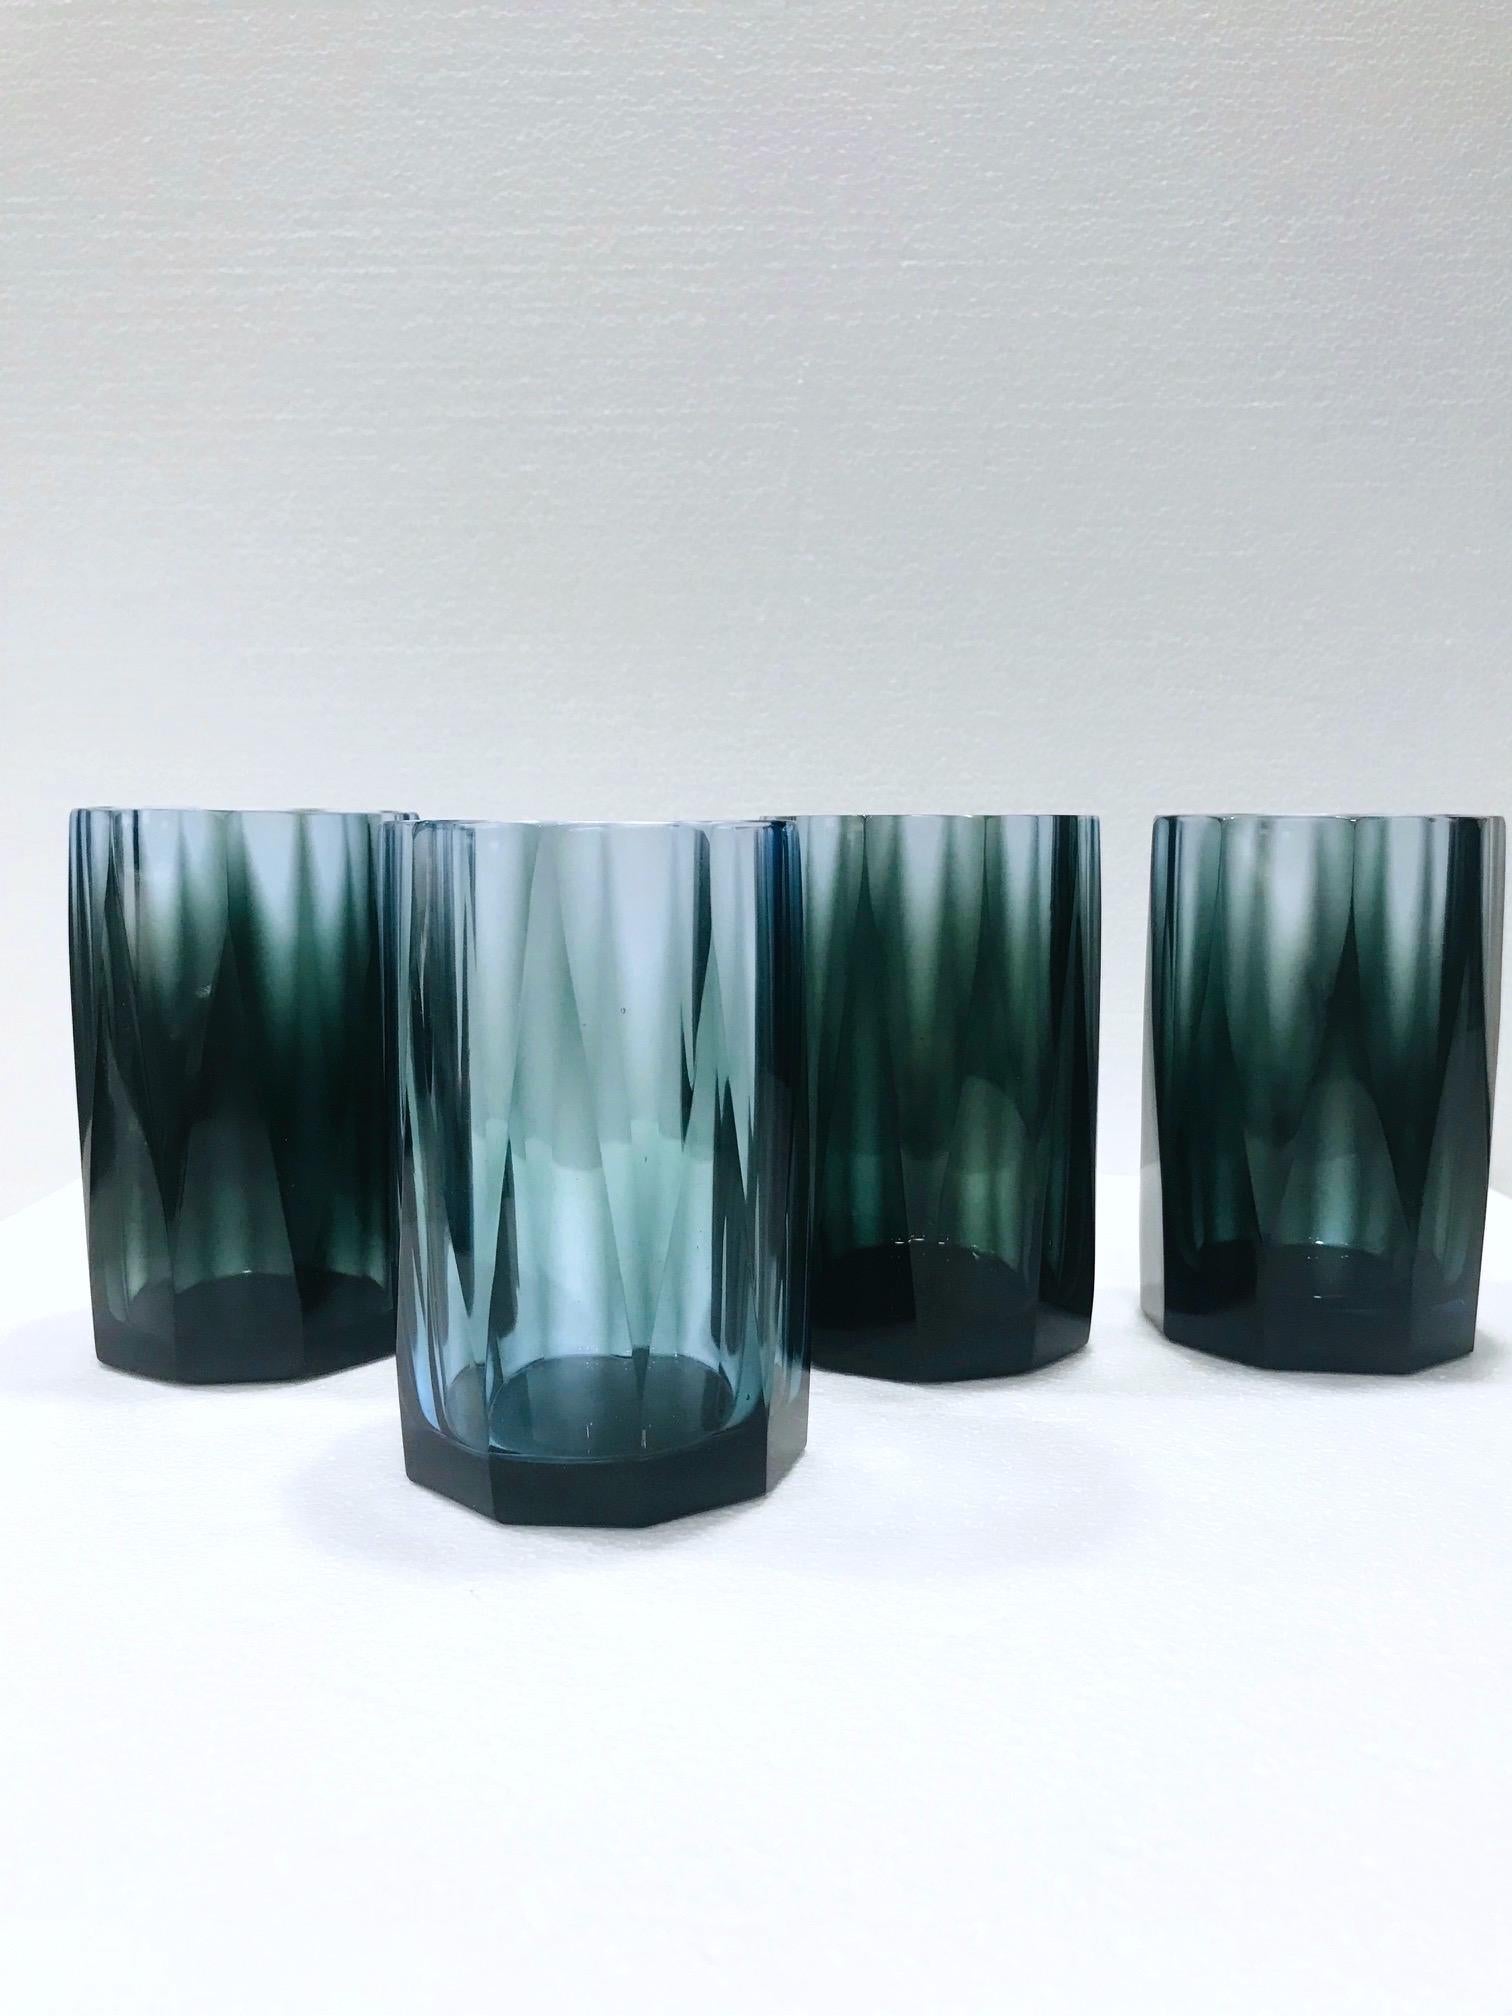 Vintage hand blown water glasses or double old fashioned barware glasses with faceted prism design. Each glass is individually handcrafted, creating a unique blend of colors in gradient smoked blue and gray. Hollywood Regency design making a chic